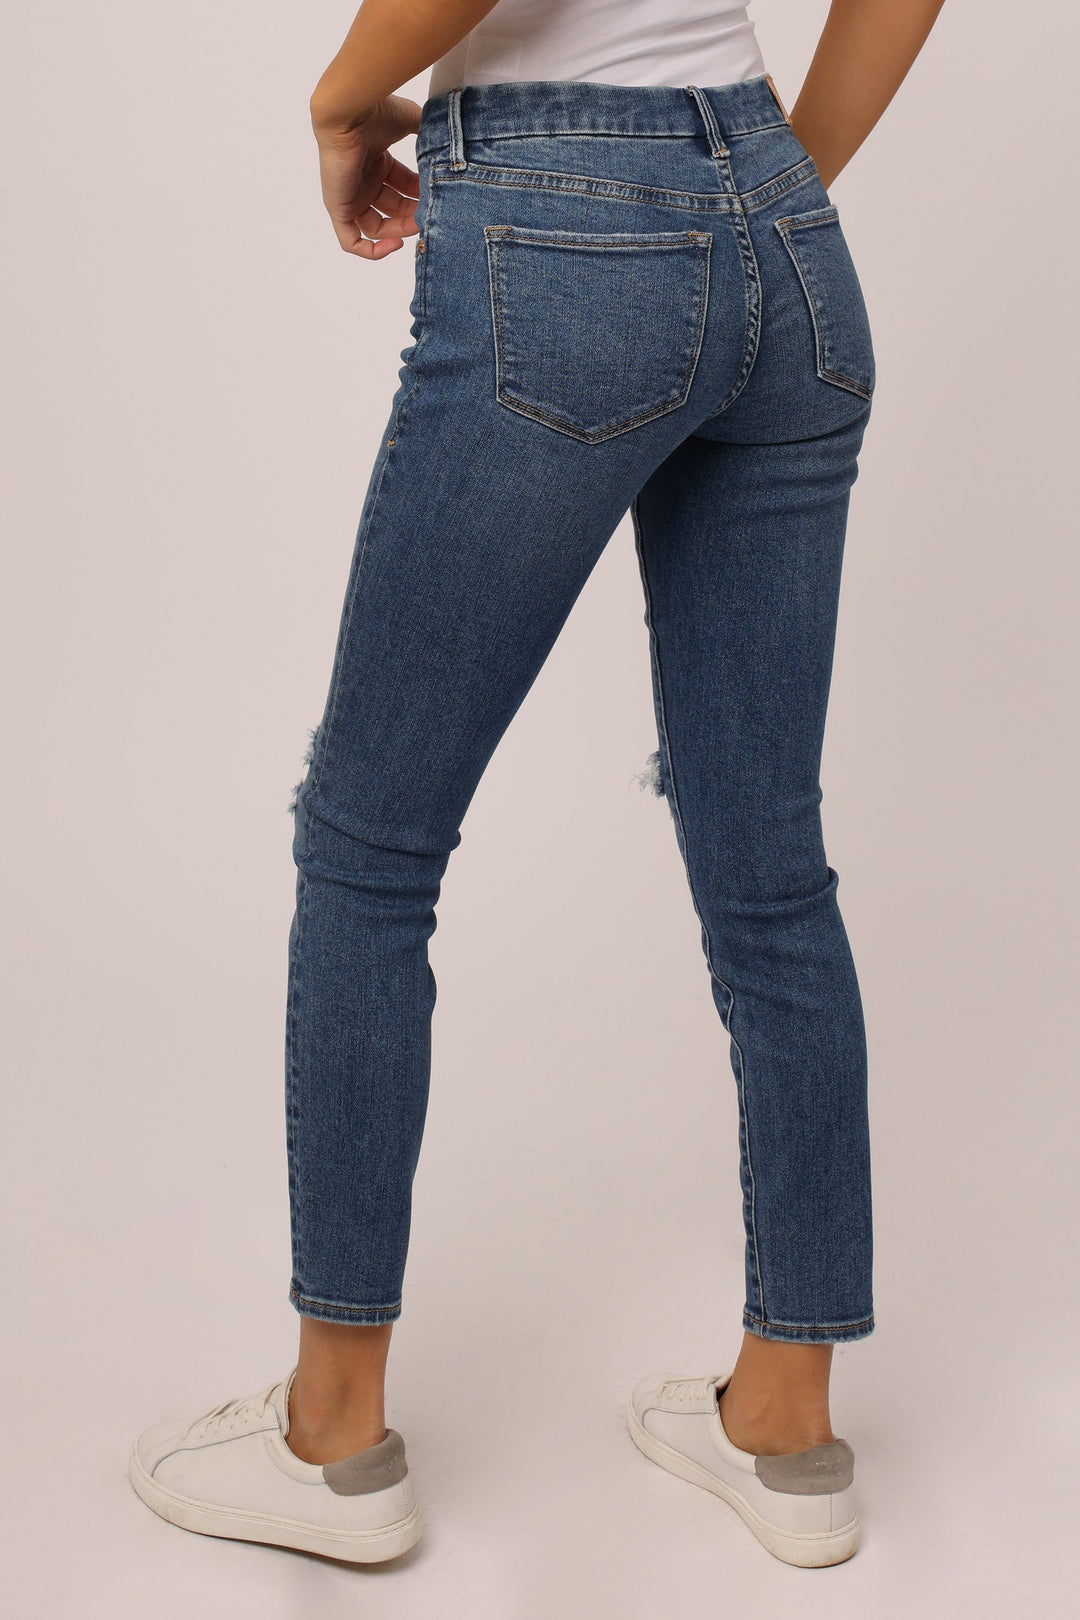 image of a female model wearing a JOYRICH MID RISE ANKLE SKINNY JEANS BENFIELD JEANS